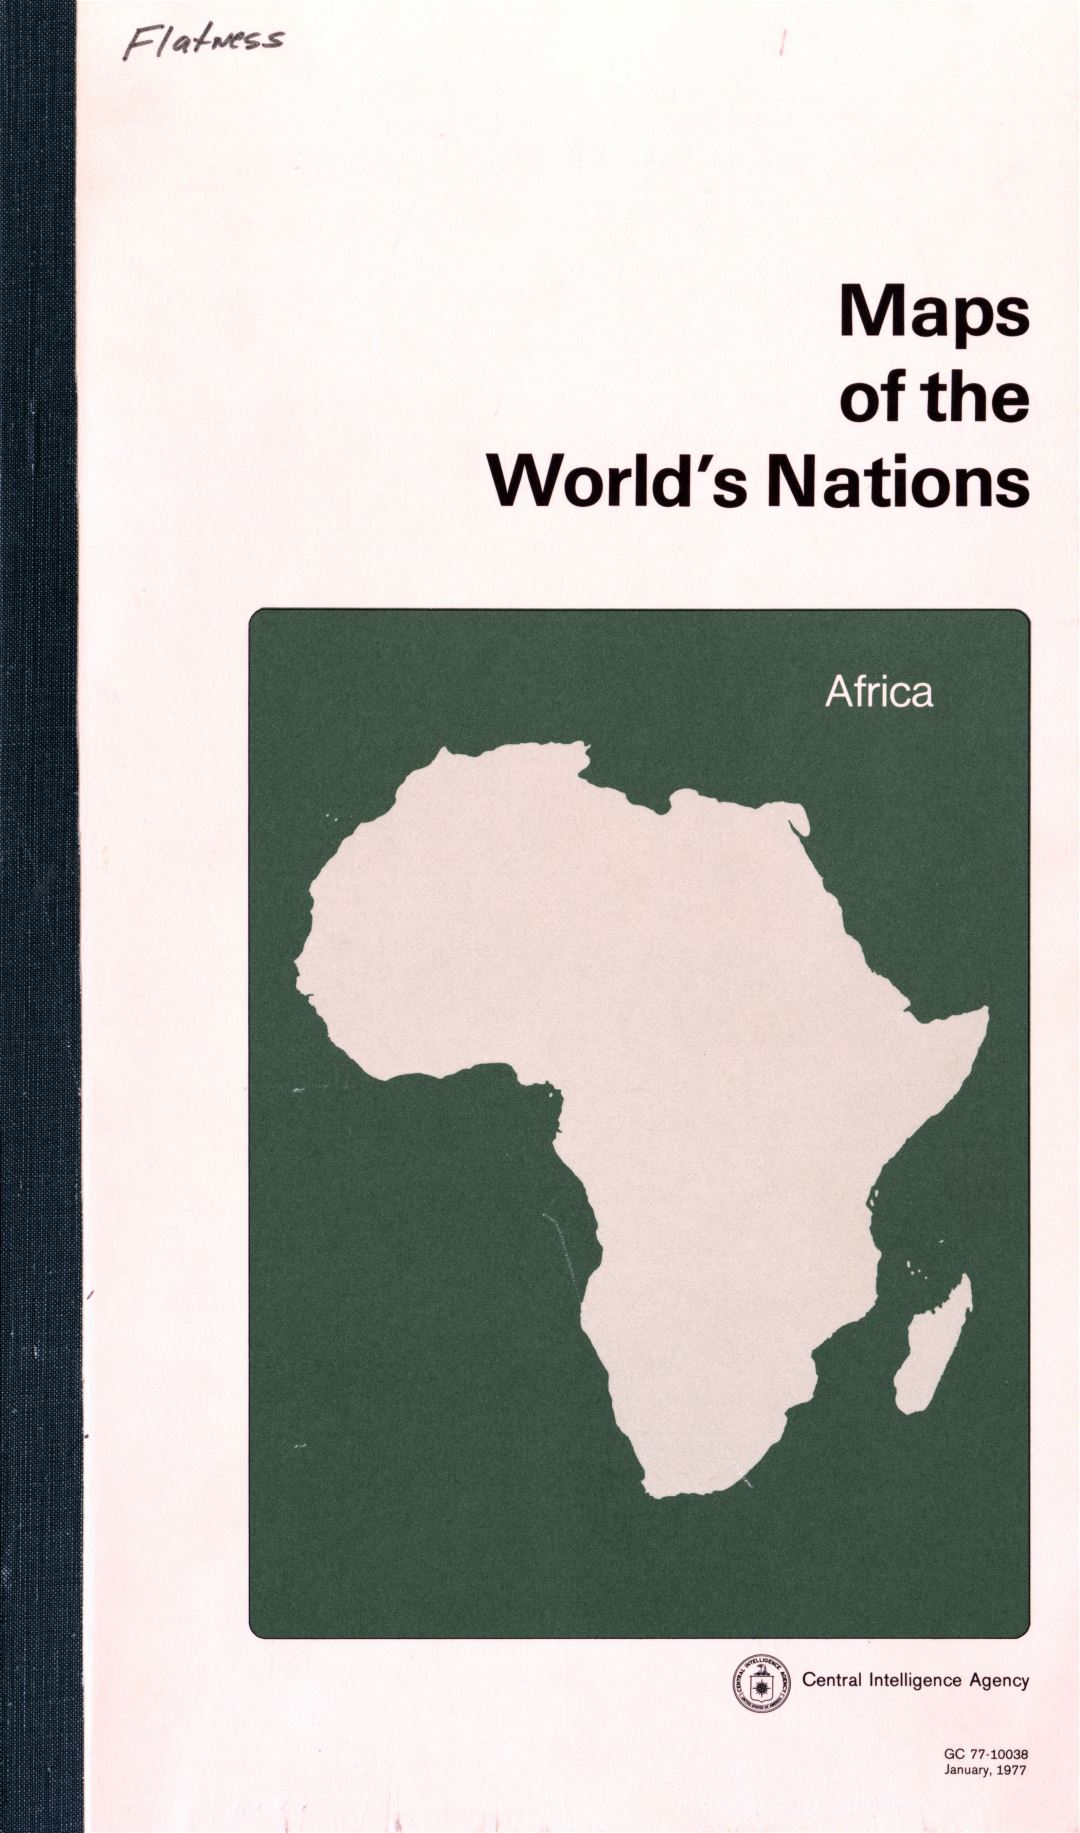 Maps of the World's Nations - Africa (cover)